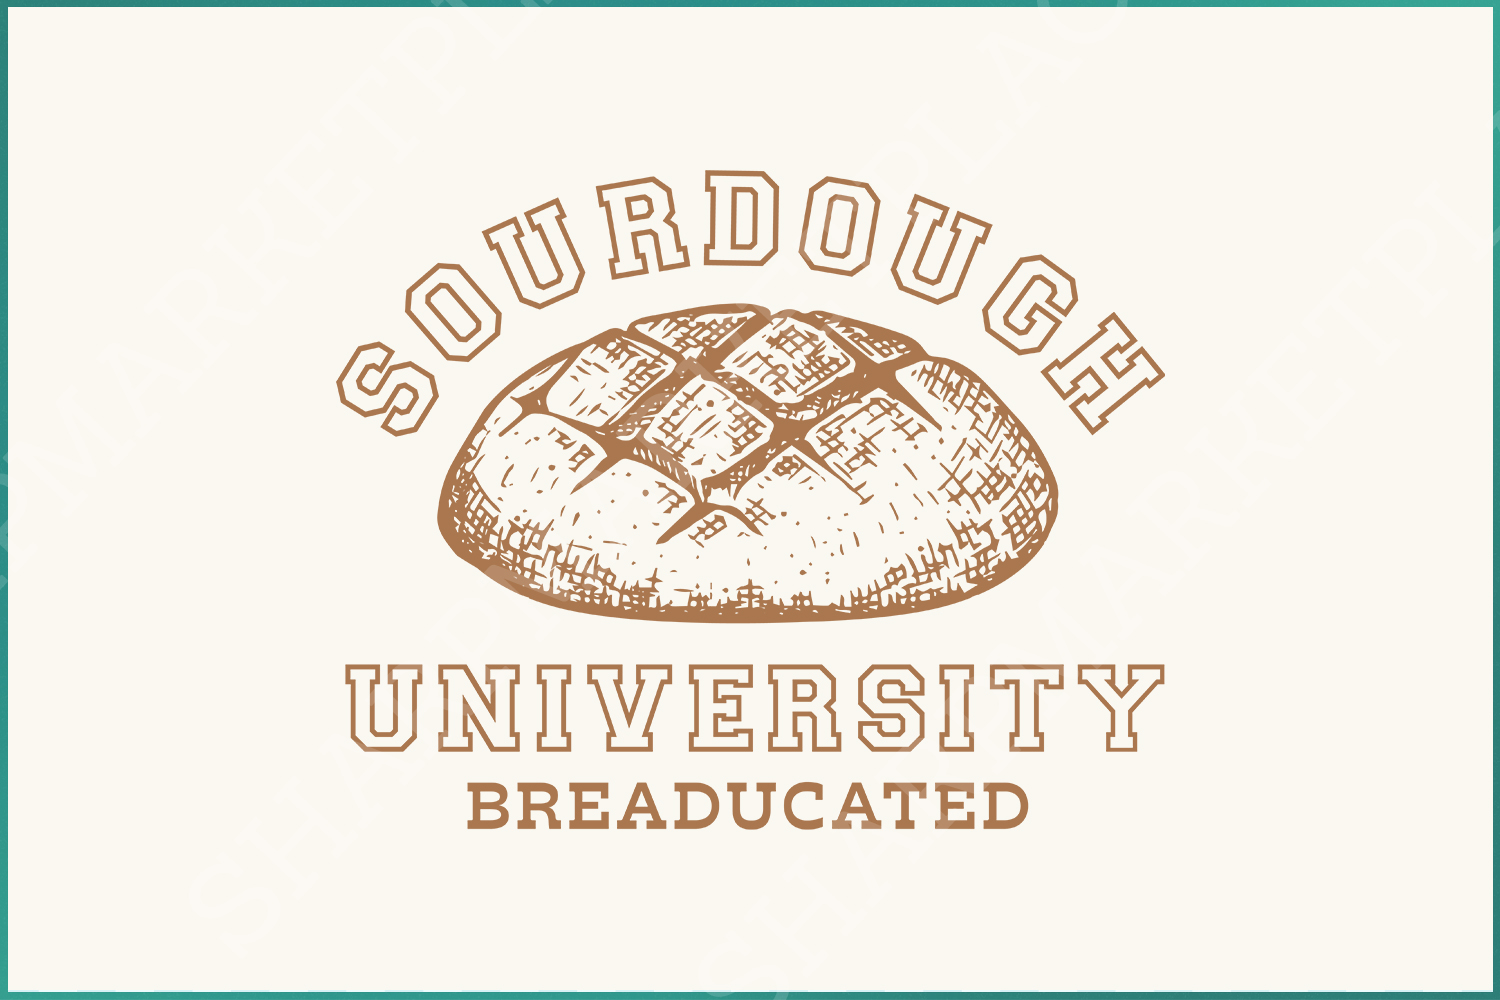 Sourdough University PNG, Breaducated Digital Design, Trendy Mama PNG for Sublimation, Funny